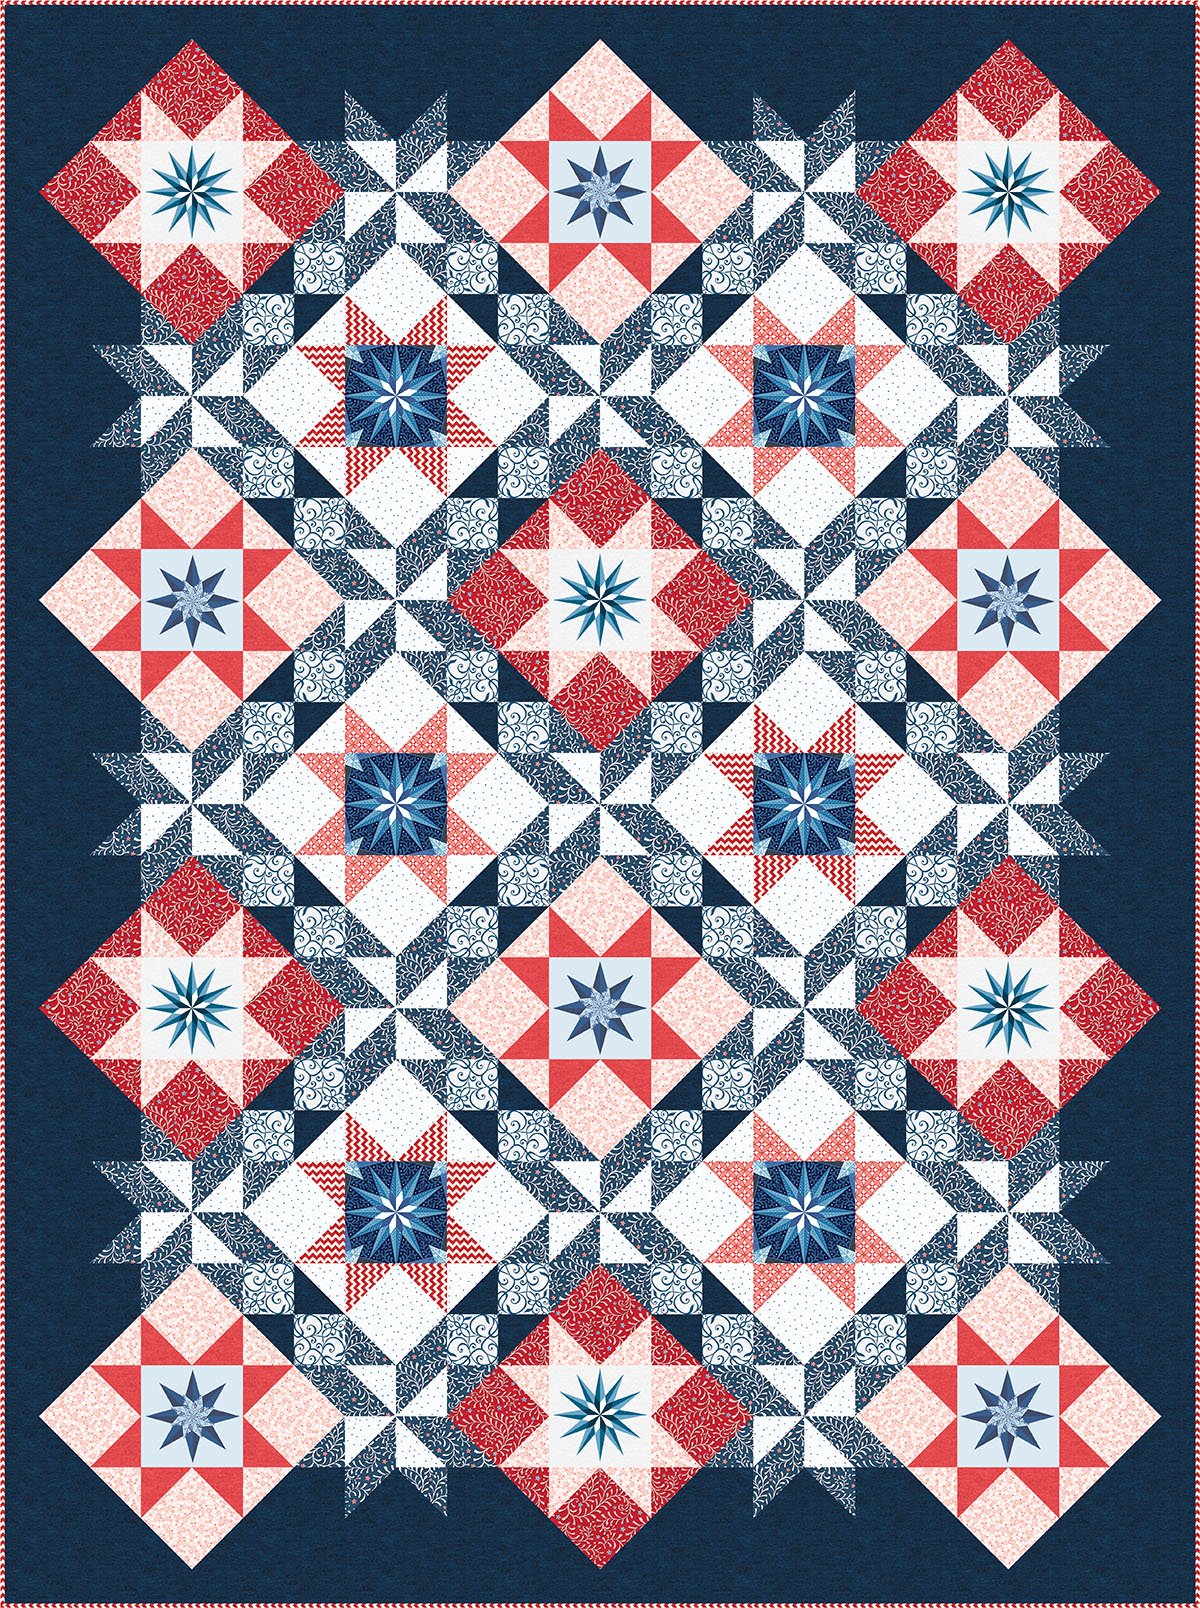 Stardust Quilt - red and blue